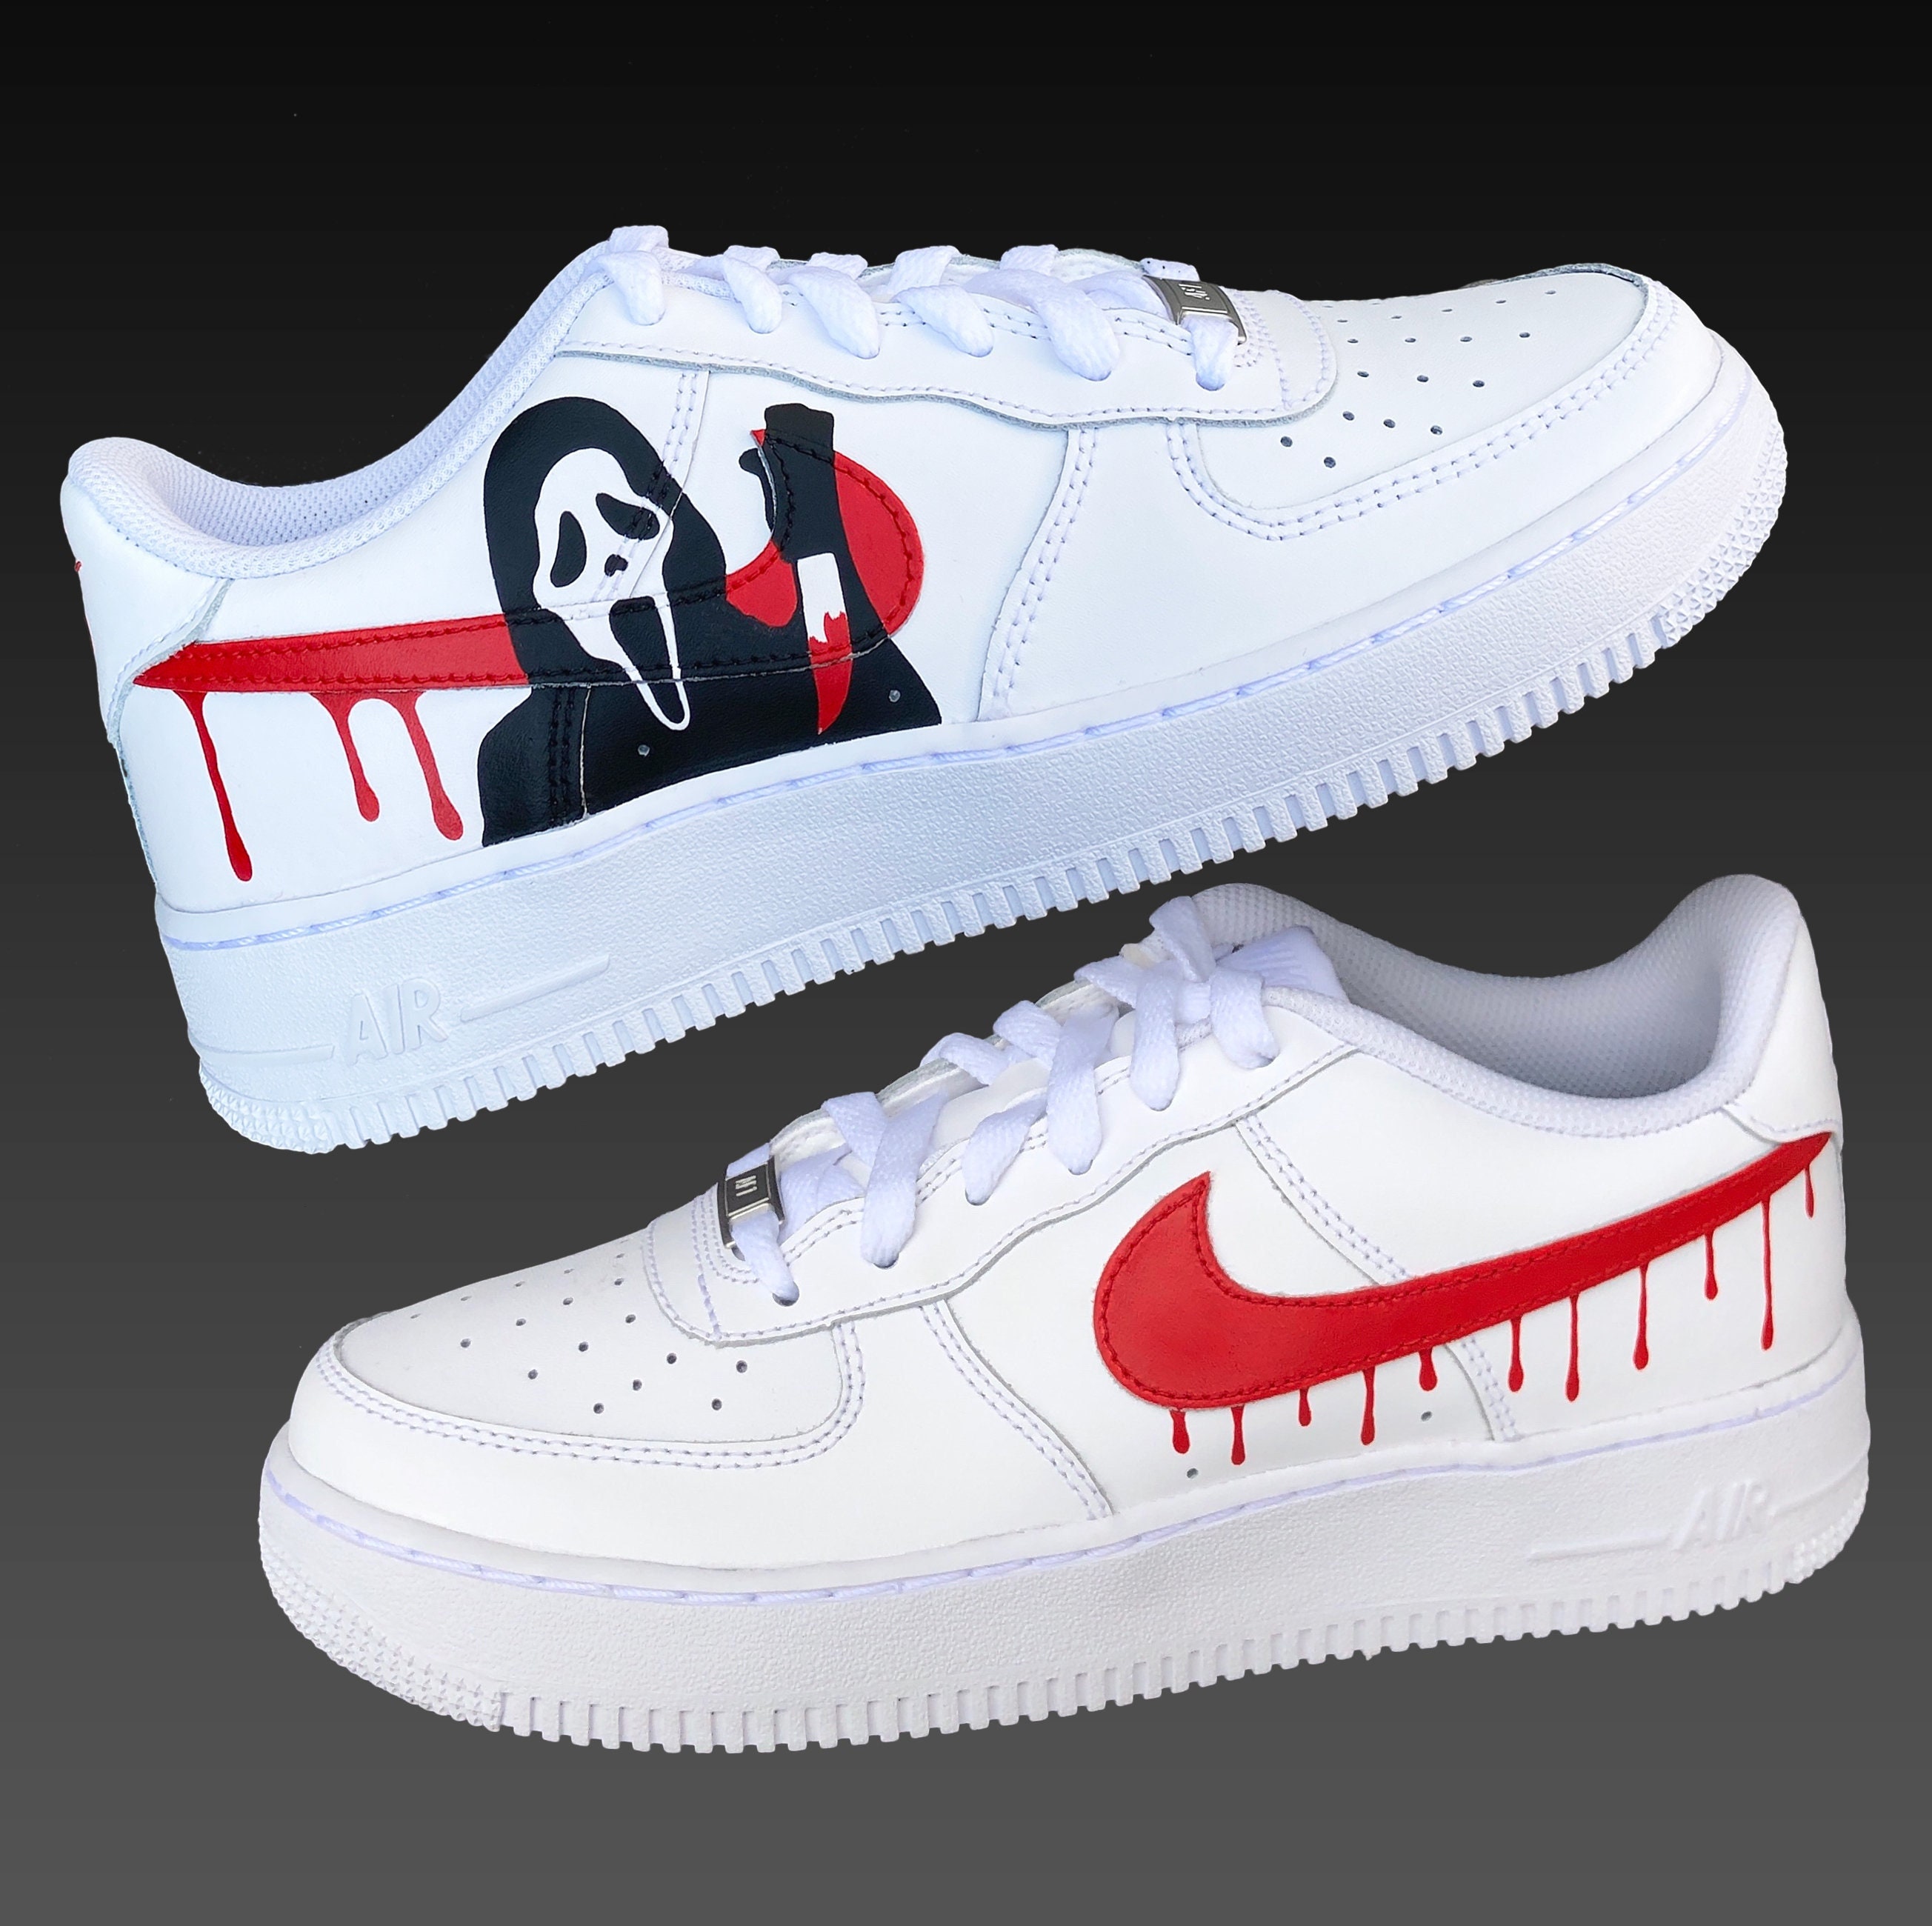 Sneakers personalizzate Ghost face dipinte a mano airforce 1 Halloween Scarpe Calzature uomo Scarpe da ginnastica Scarpe da ginnastica con lacci 